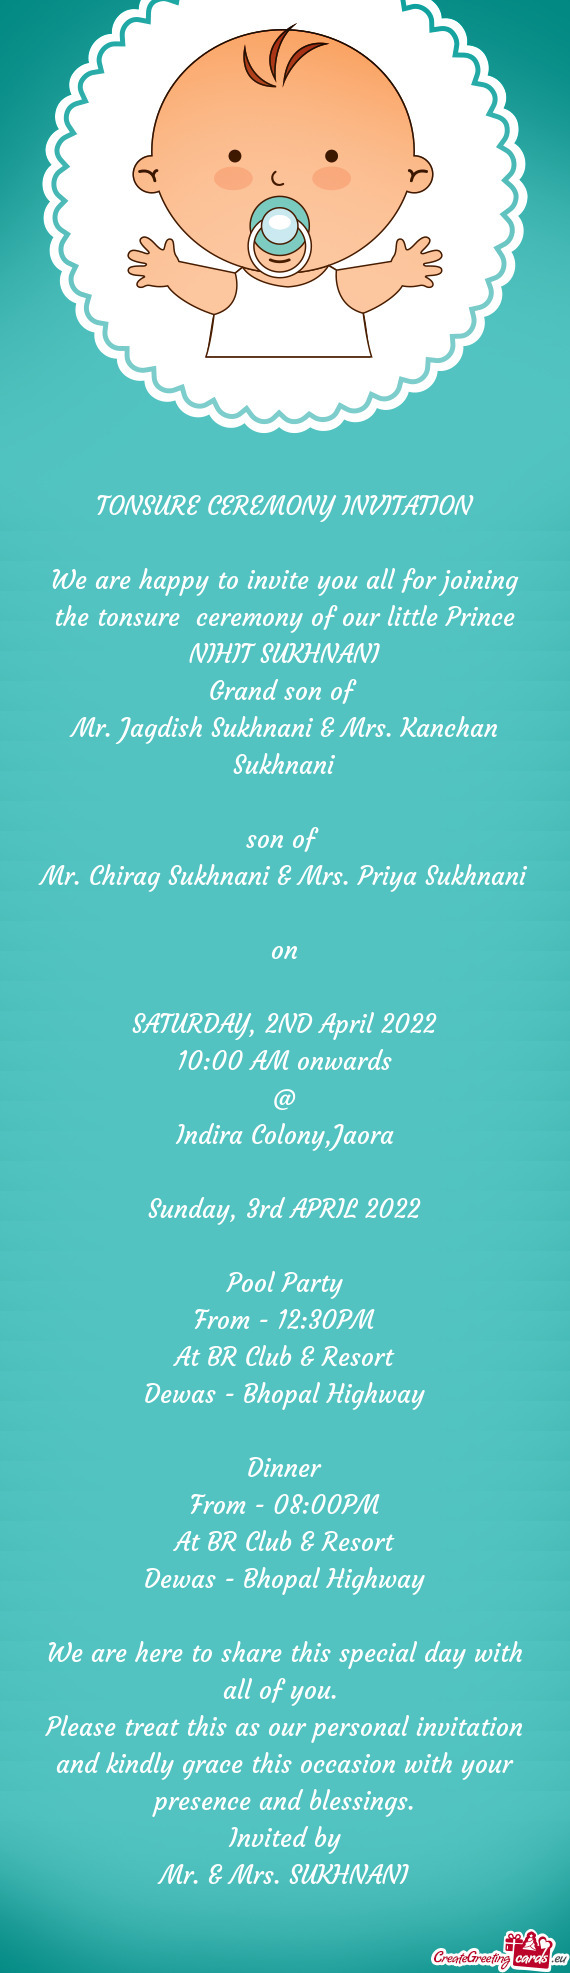 We are happy to invite you all for joining the tonsure ceremony of our little Prince NIHIT SUKHNANI